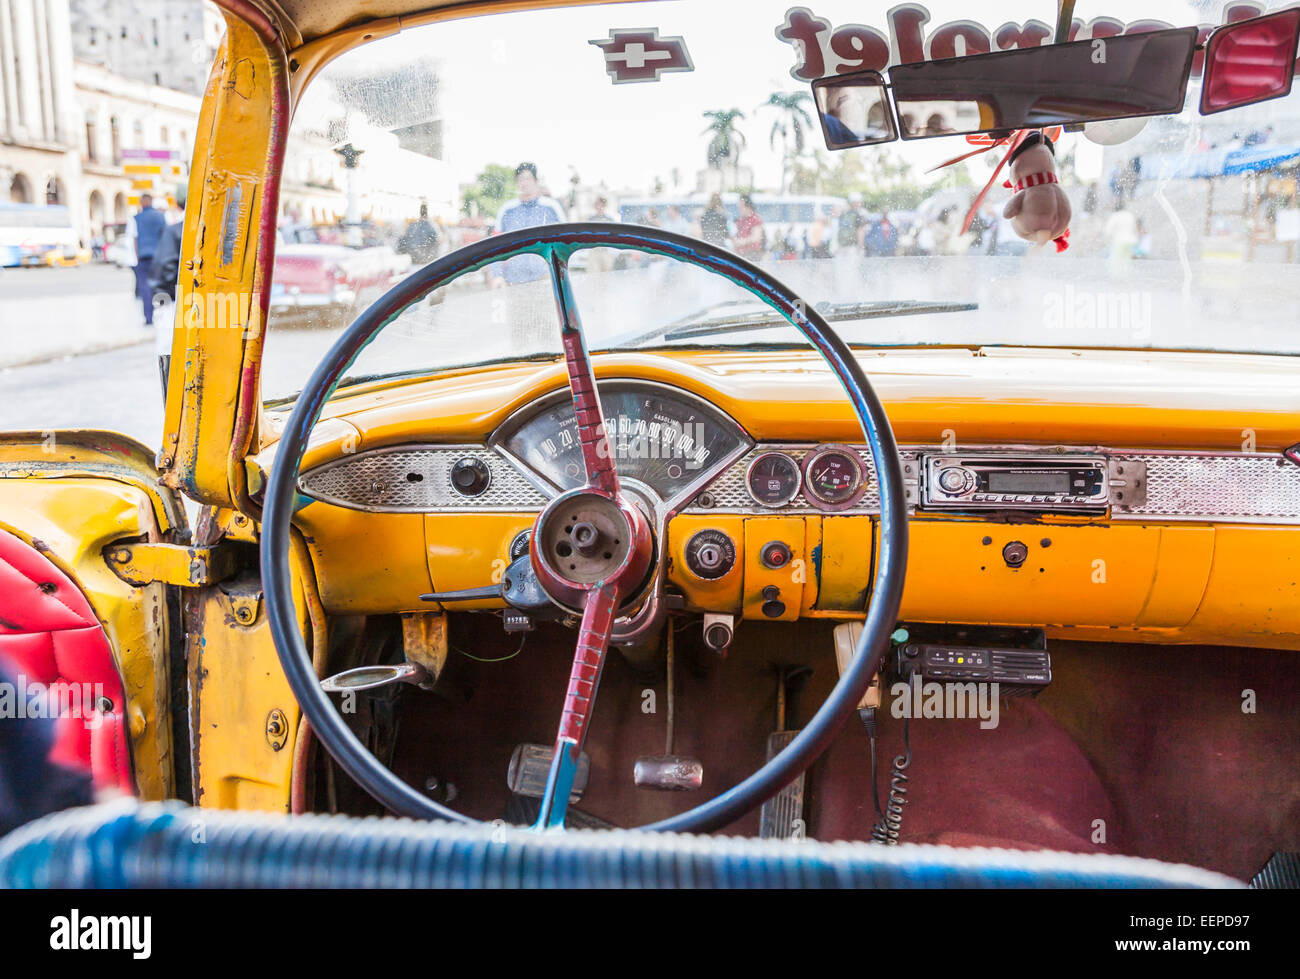 Dilapidated steering wheel and interior of a typical battered old vintage Cuban taxi, old Havana, Cuba Stock Photo